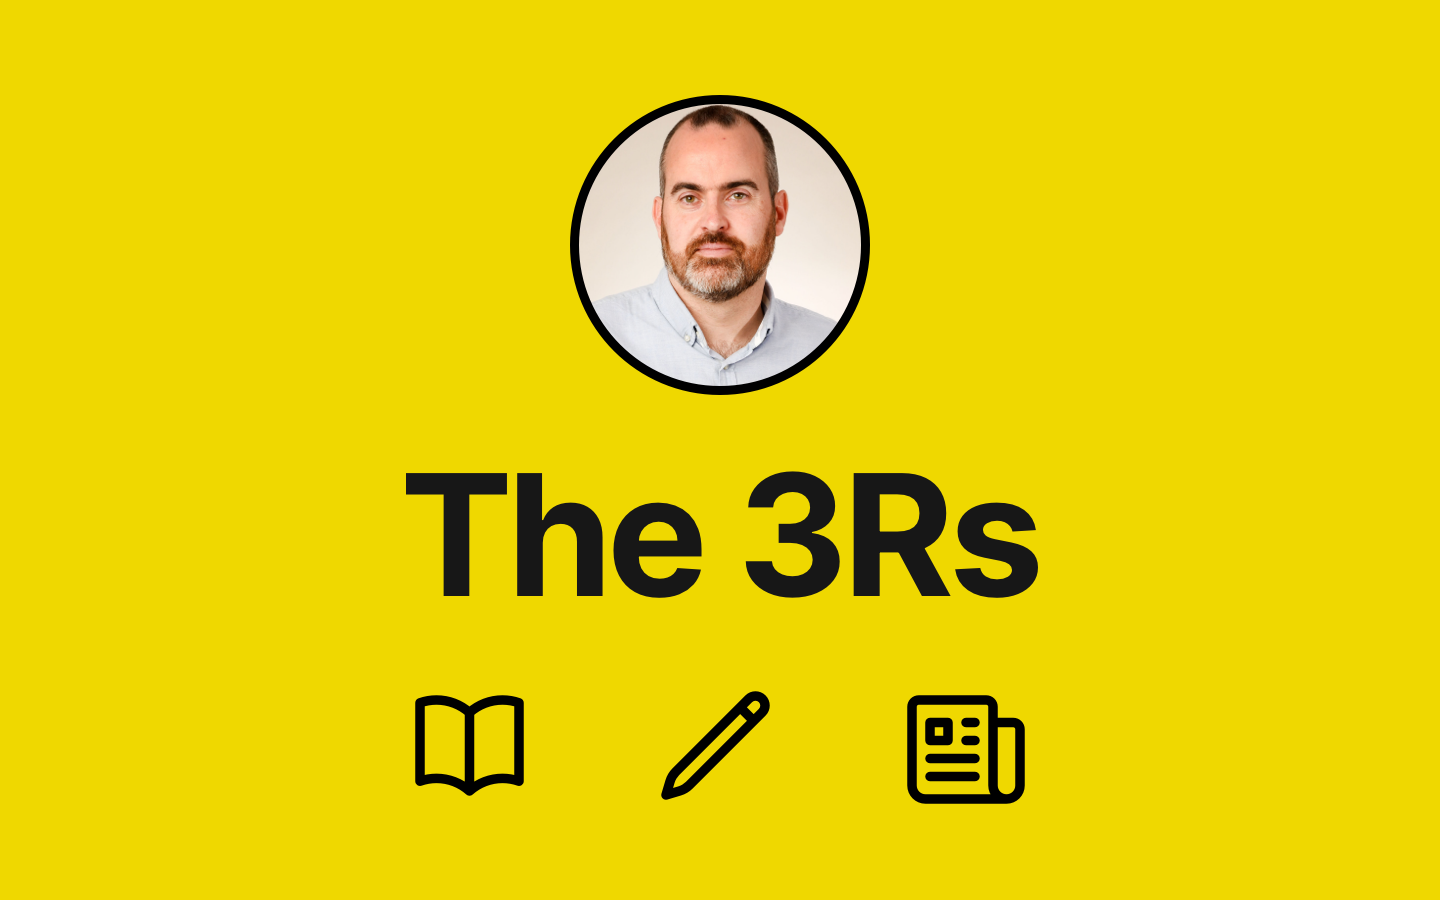 The 3Rs: What I'm reading, (w)riting, & research I'm interested in - Issue #5 feature image